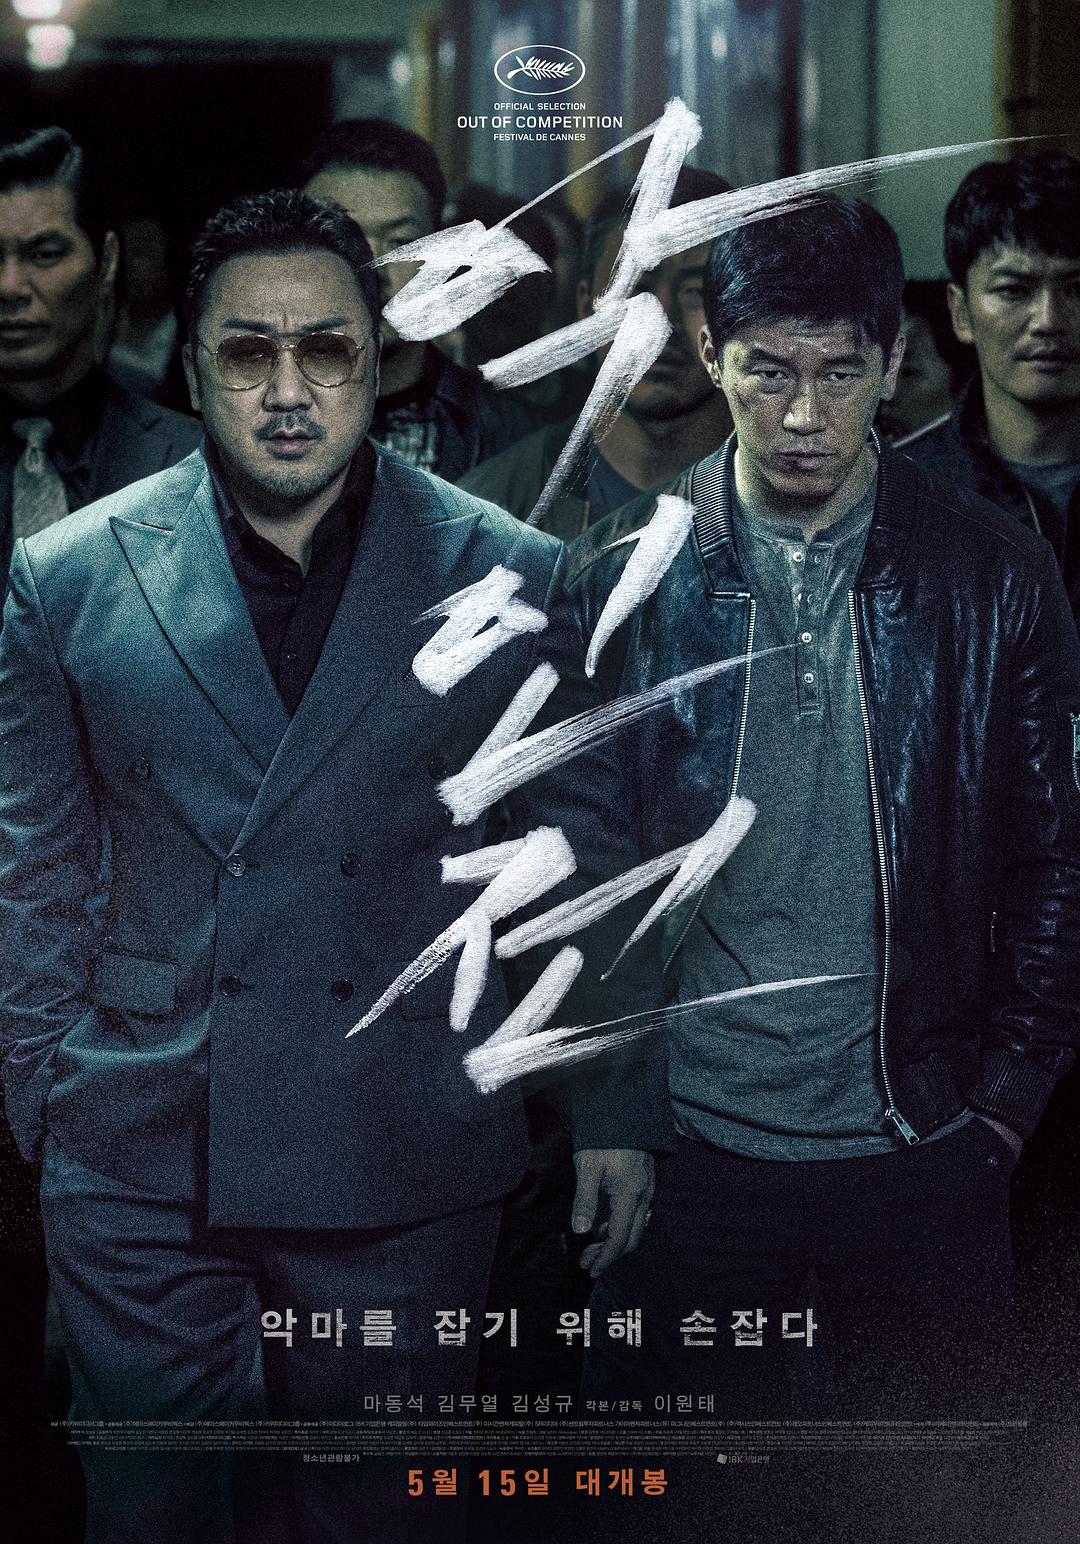 ˴ The.Gangster.the.Cop.the.Devil.2019.KOREAN.1080p.BluRay.REMUX.AVC.DTS-HD.MA.-1.png